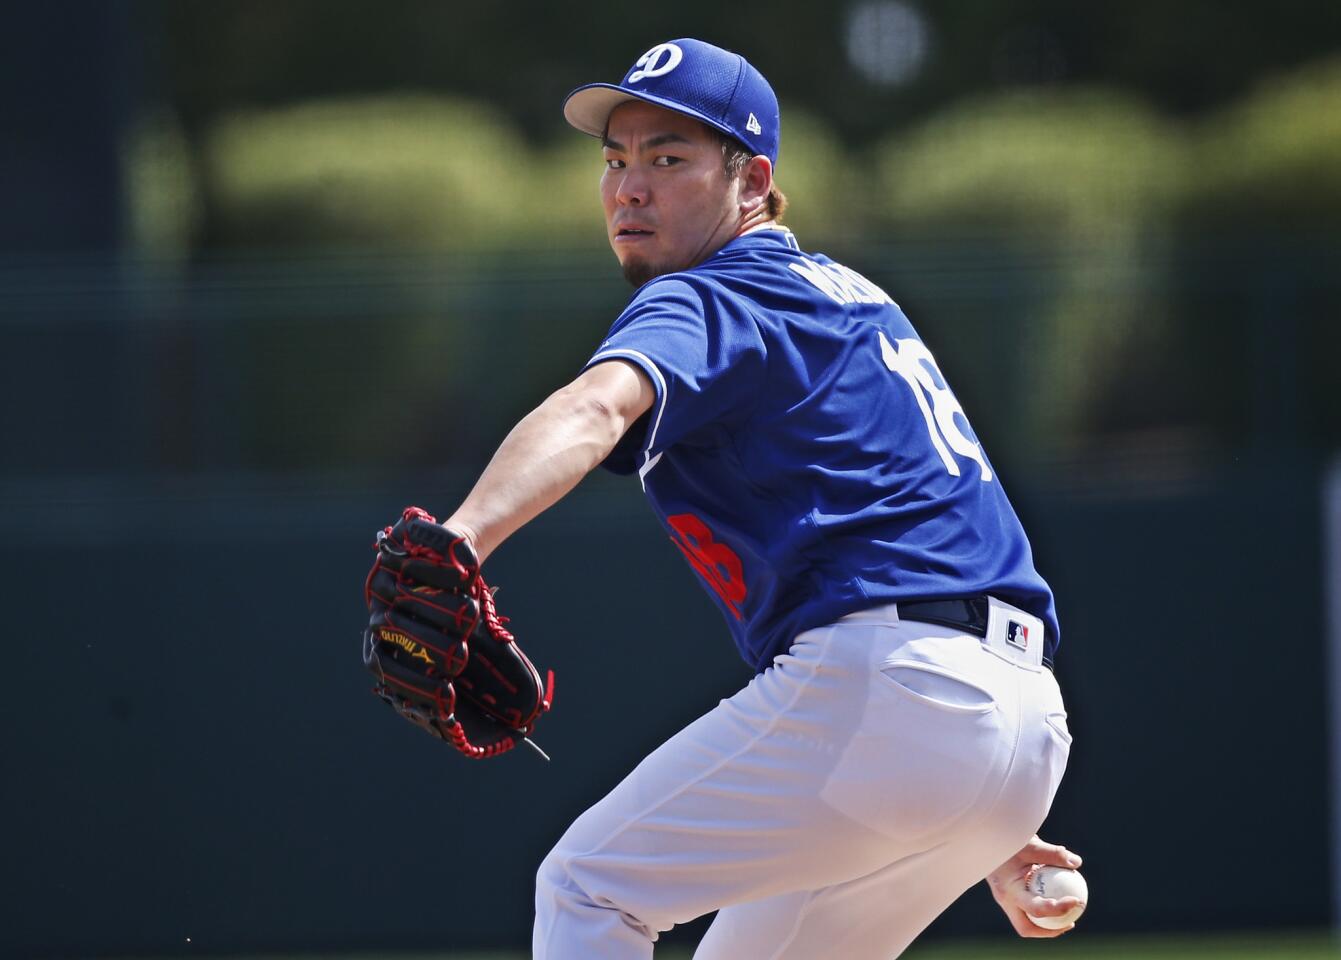 Los Angeles Dodgers pitcher Kenta Maeda pitches during a spring training baseball game against the Seattle Mariners Saturday, March 9, 2019, in Phoenix. (AP Photo/Sue Ogrocki)